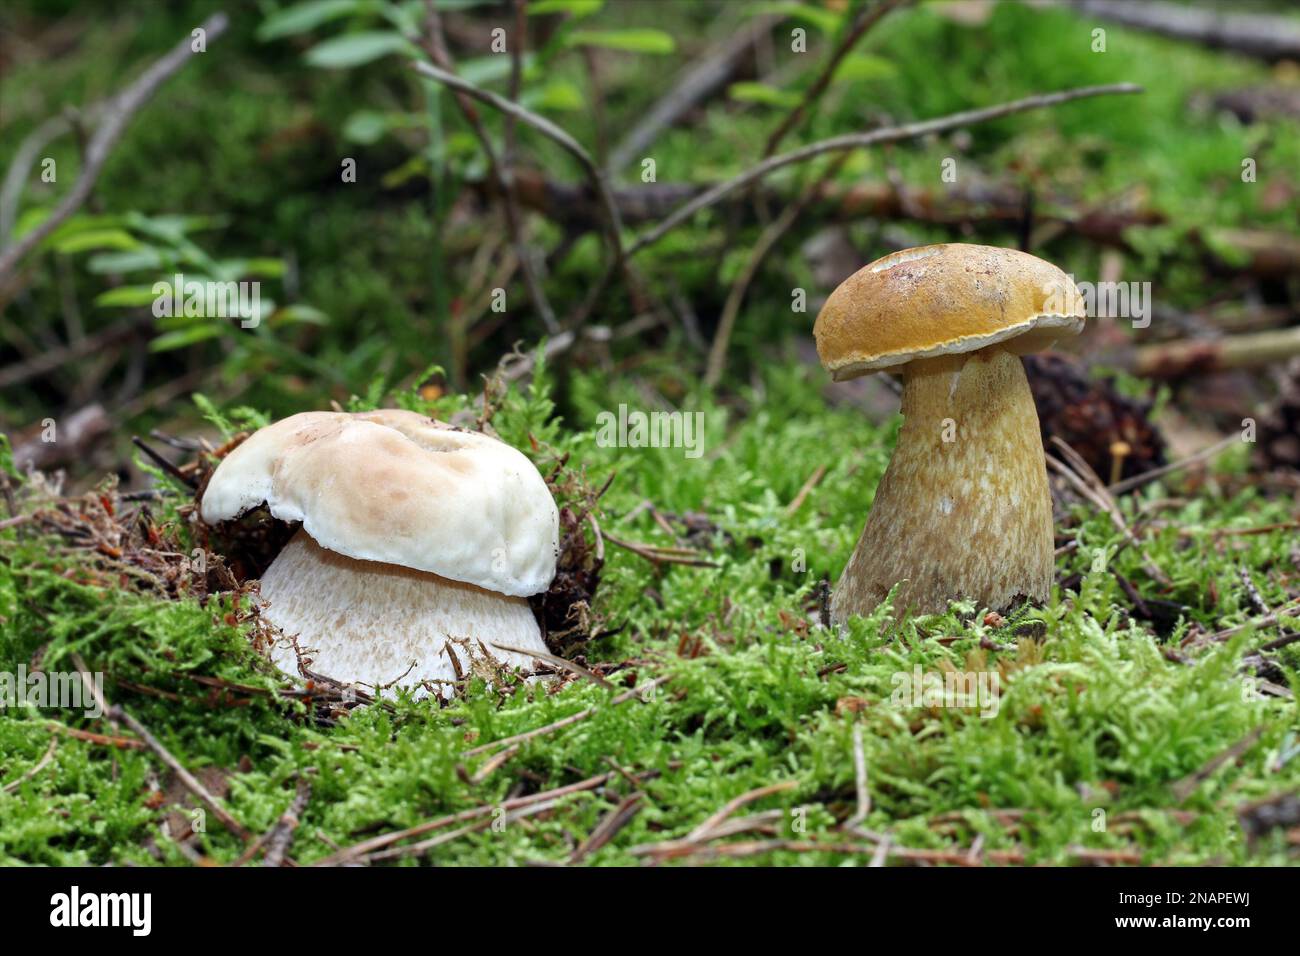 Two young mushrooms that are often confused with each other grow in the forest. On the left is an edible cep, on the right an inedible bitter bolete. Stock Photo